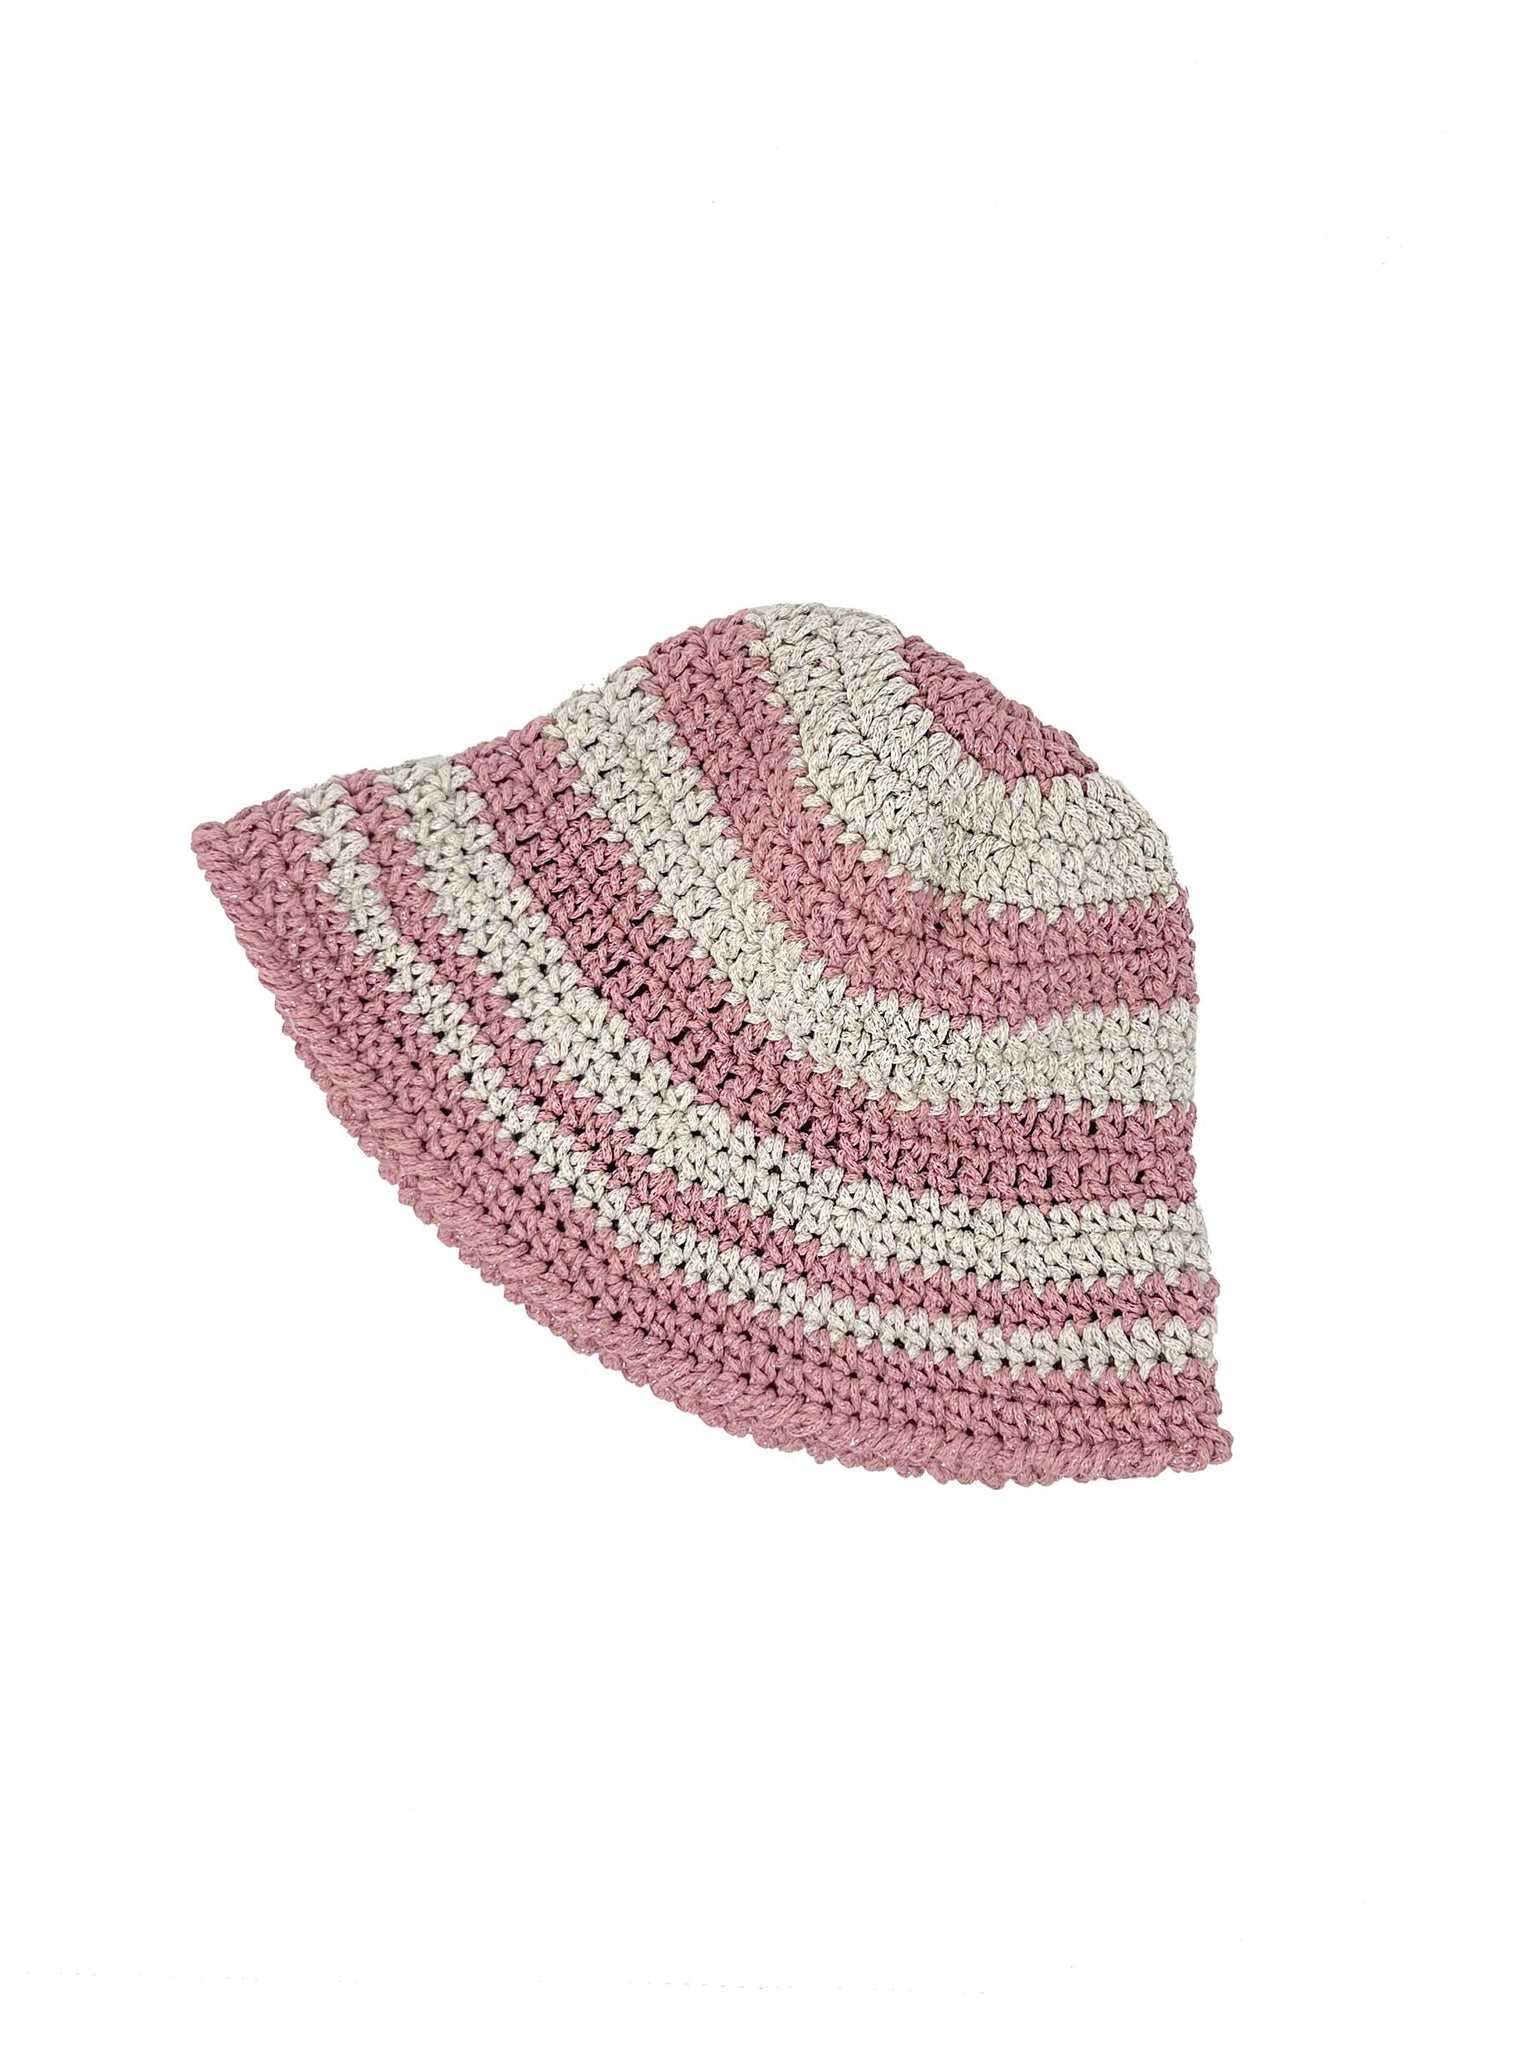 Pink and silver striped crocheted bucket hat